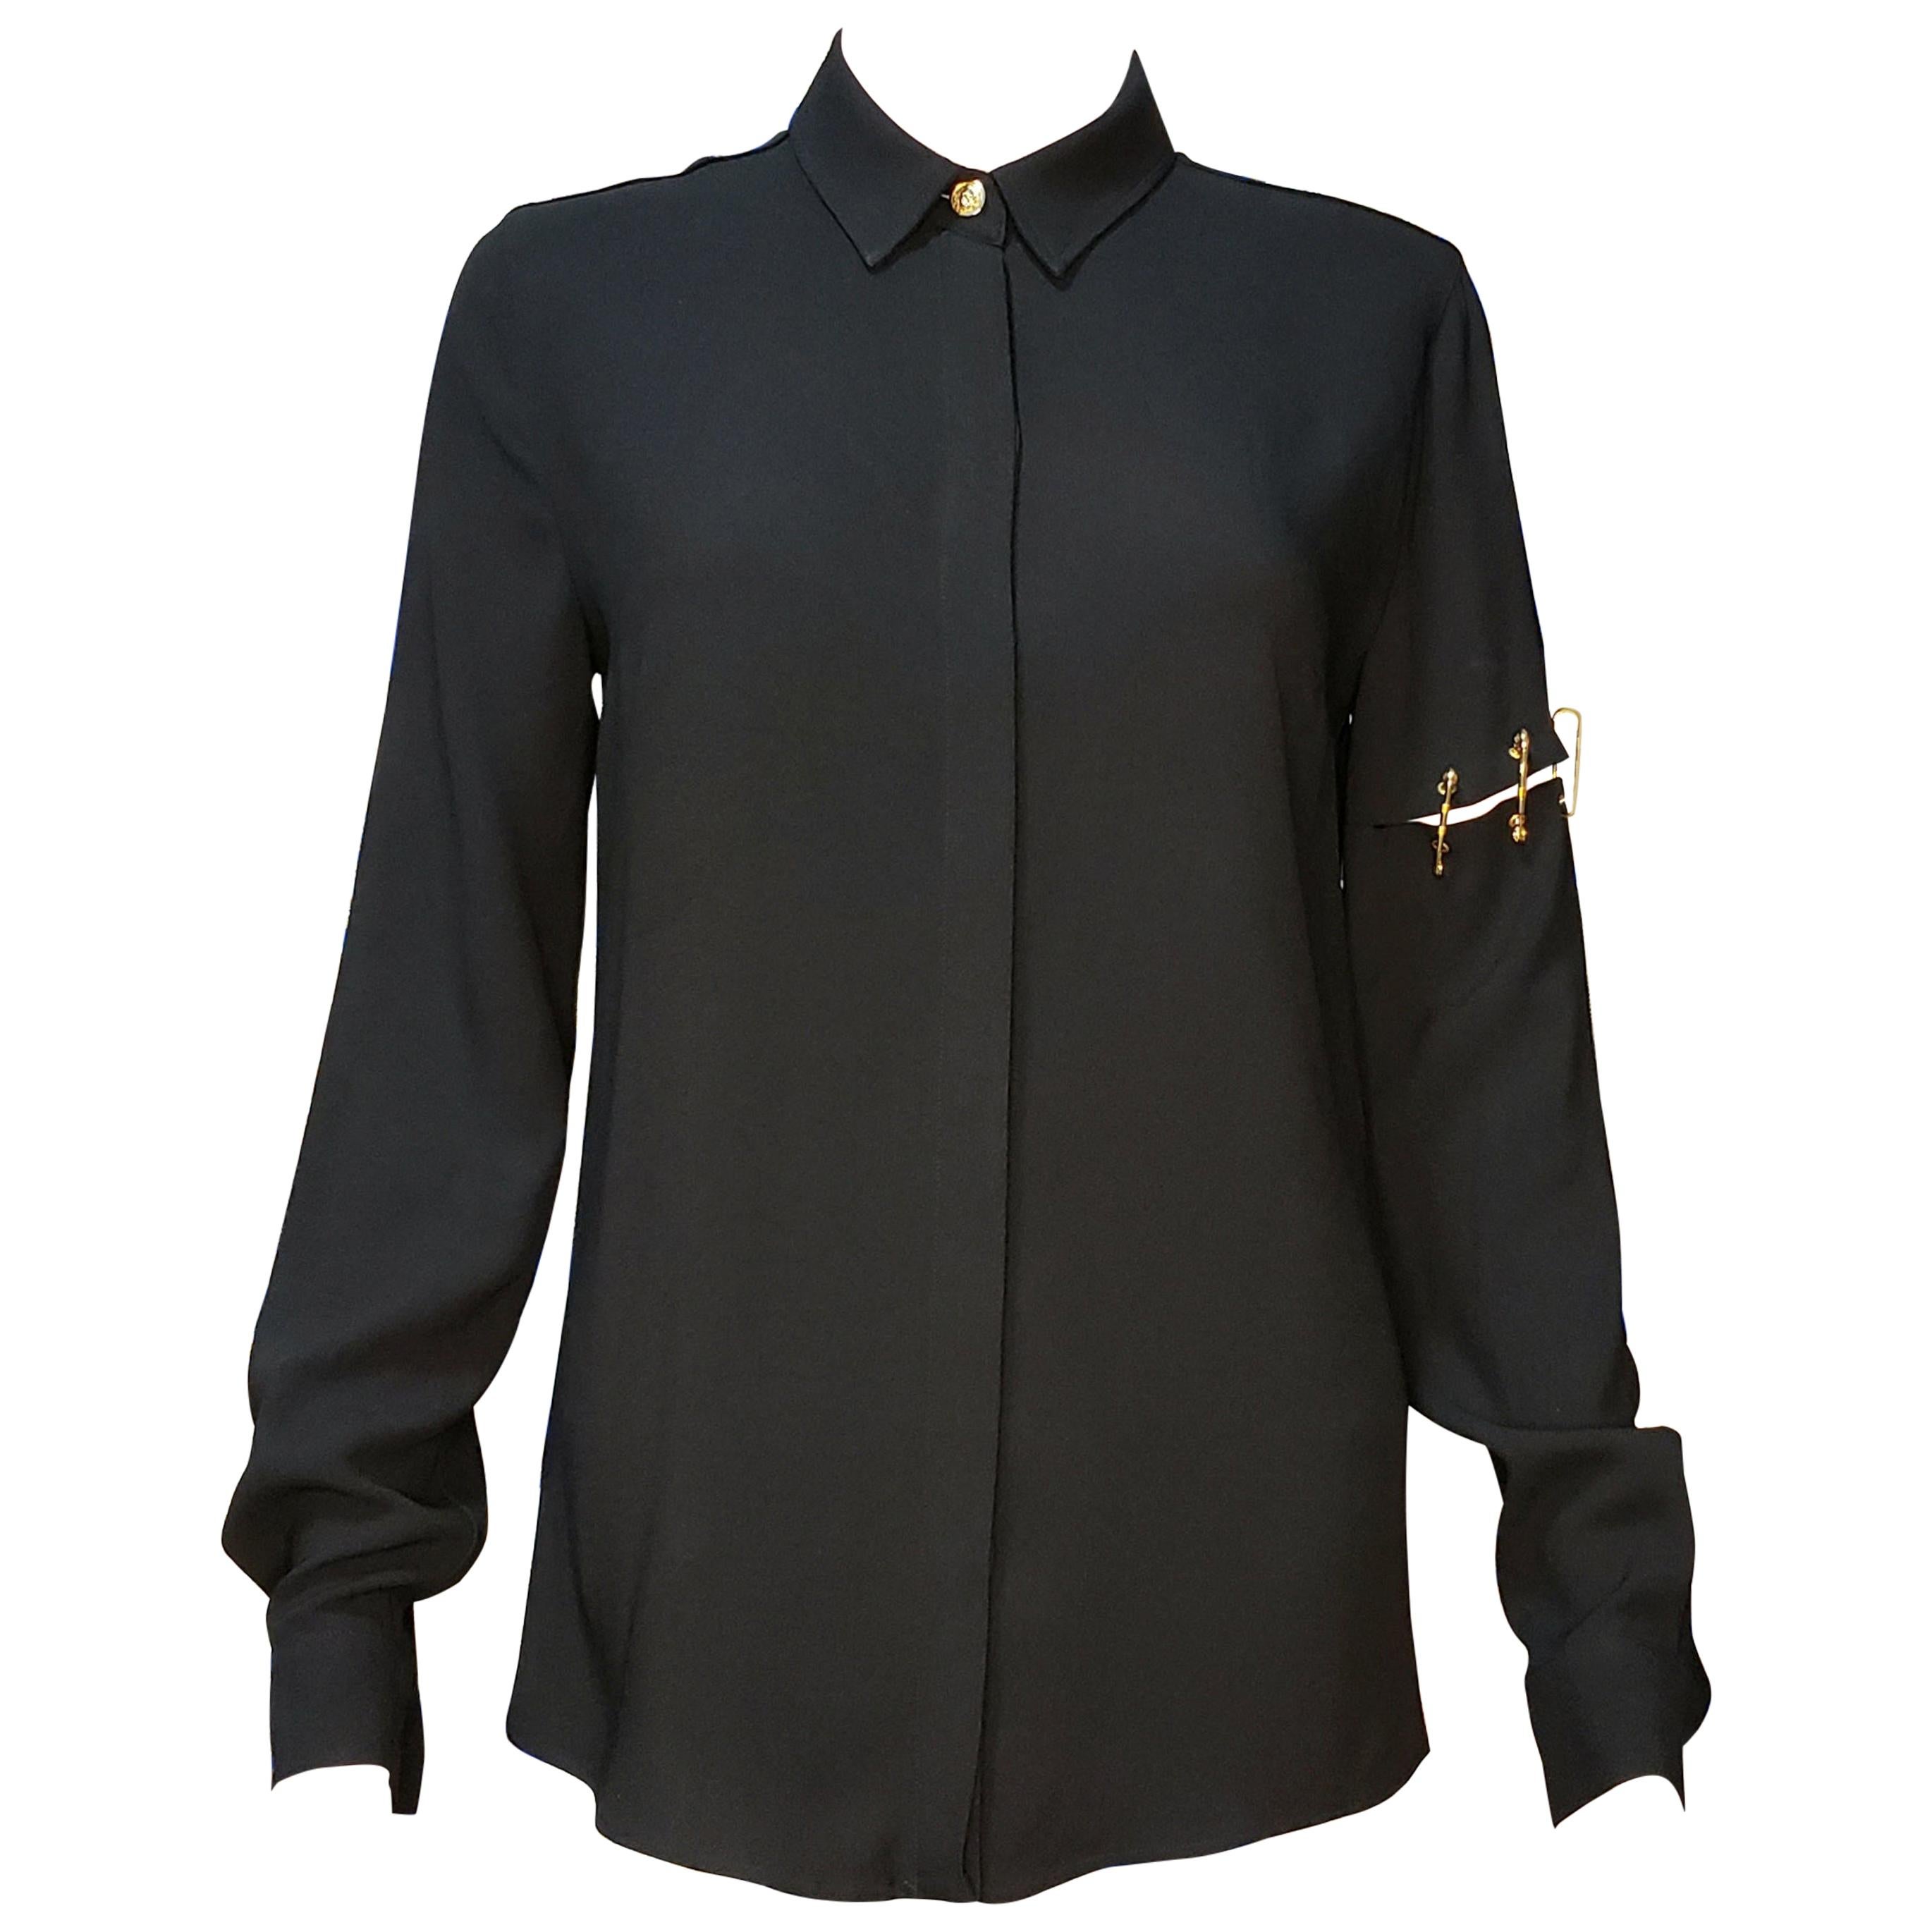 VERSUS VERSACE BLACK LONG SLEEVE SHIRT with GOLD-TONE LION PINS 38 - 2